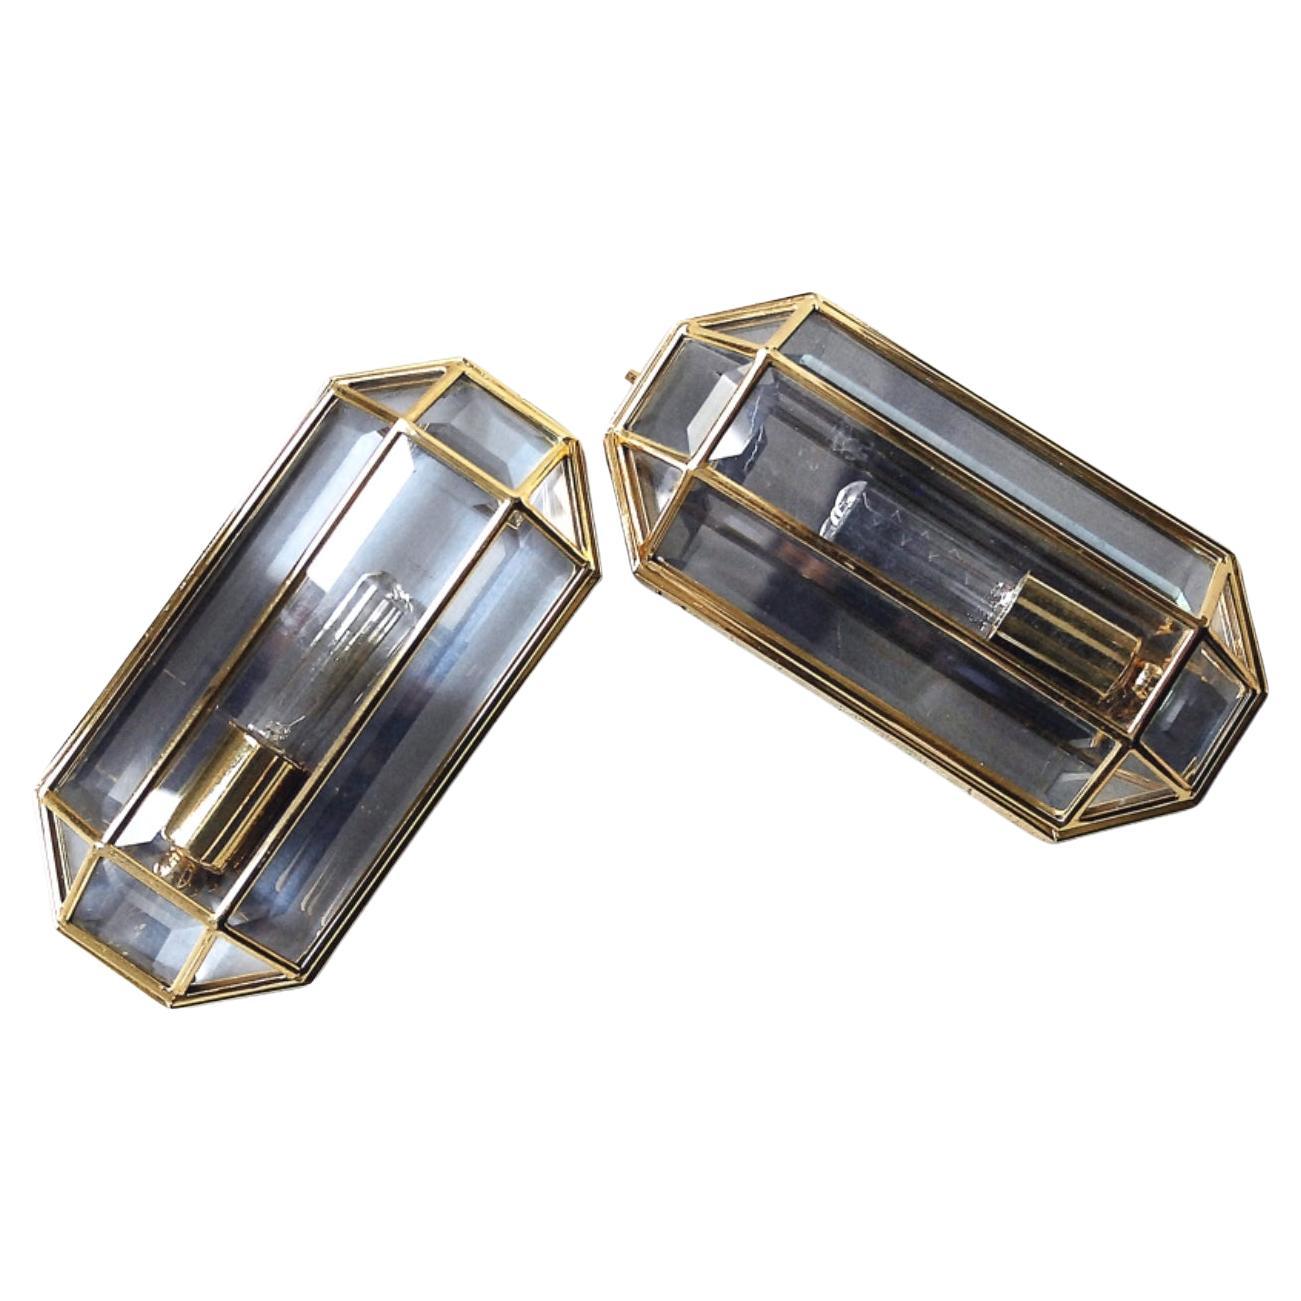 Pair of Geometric Mid-Century Modern Sconces in Brass, 1970s For Sale